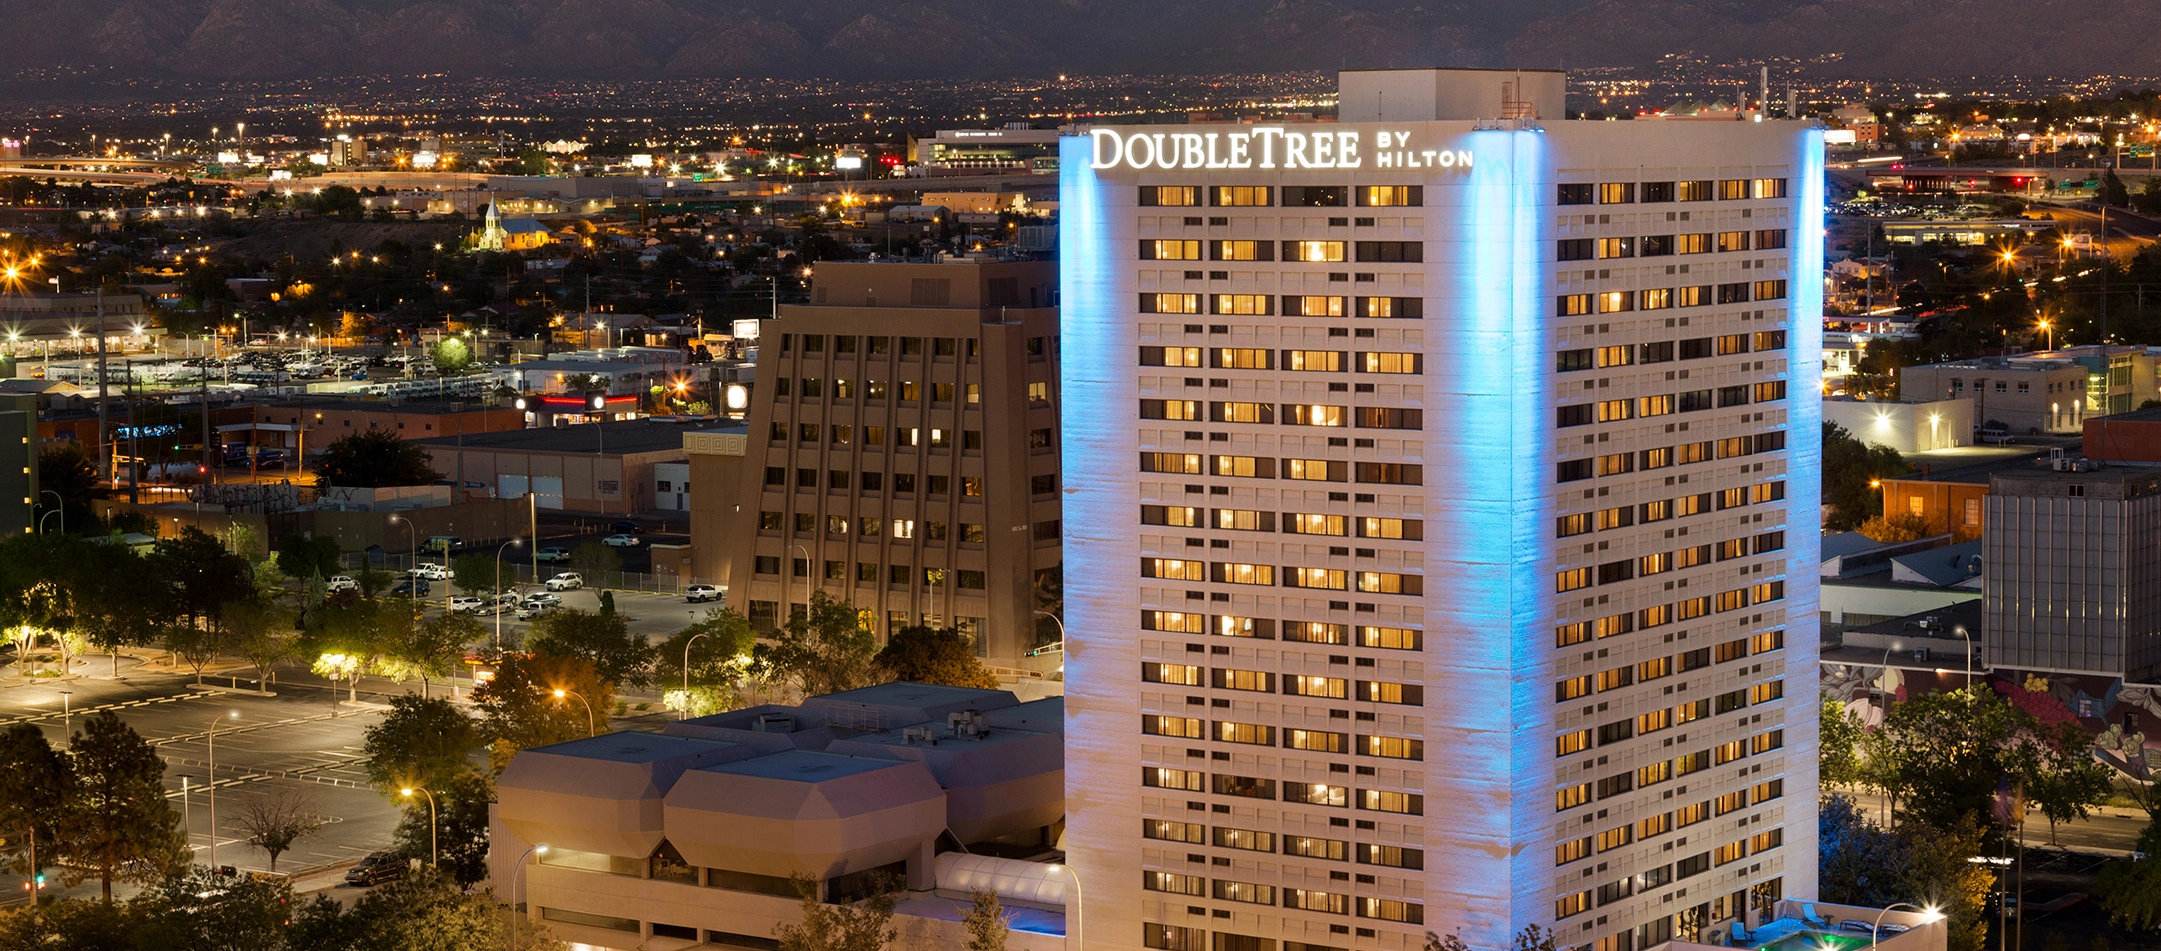 DoubleTree by Hilton Hotel Albuquerque in skyline